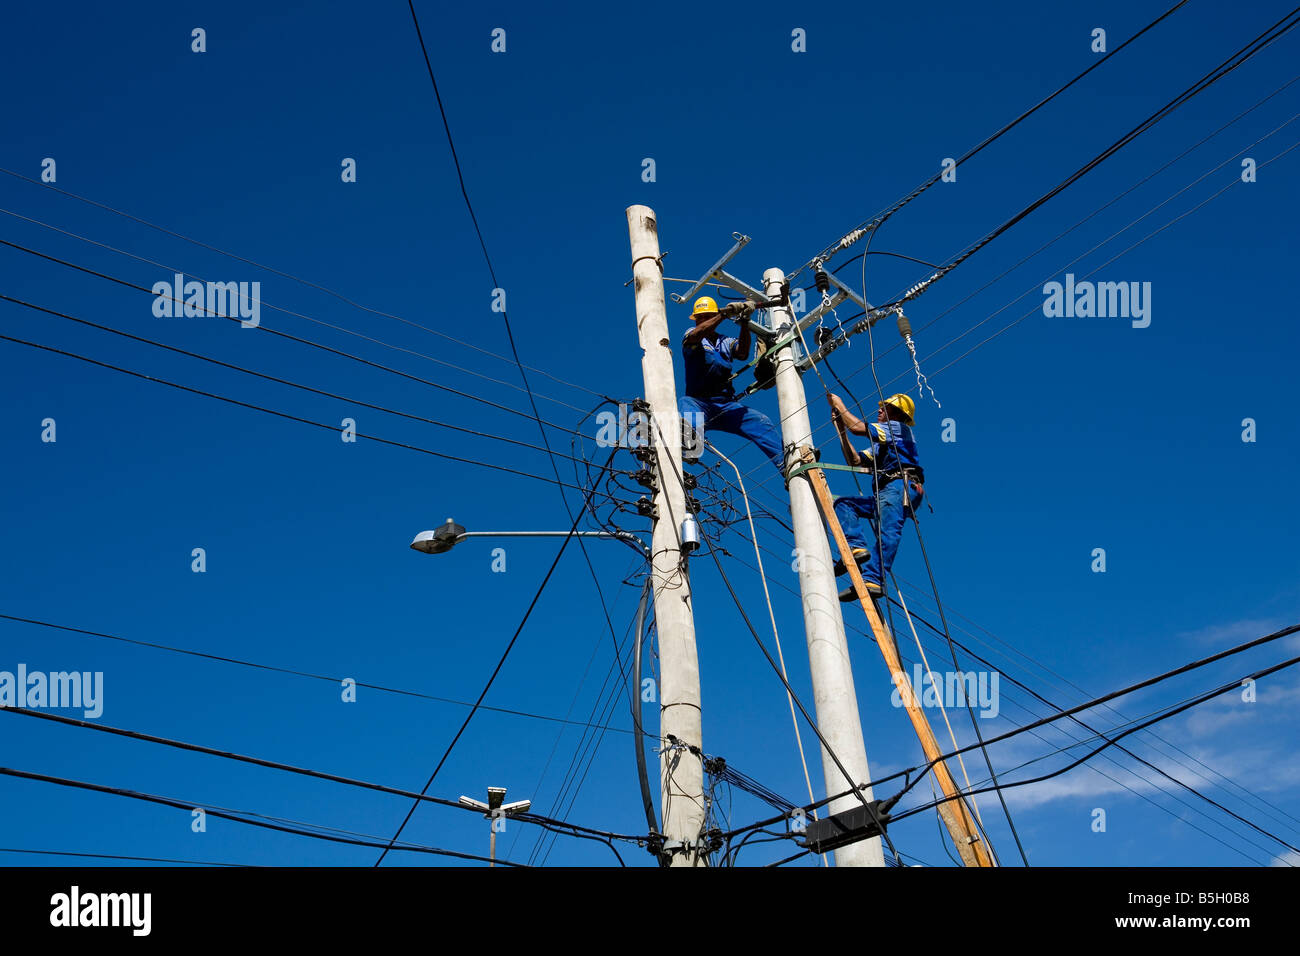 A man is cutting down an electricity post with an axe Paraty Rio de Janeiro state Brazil Stock Photo